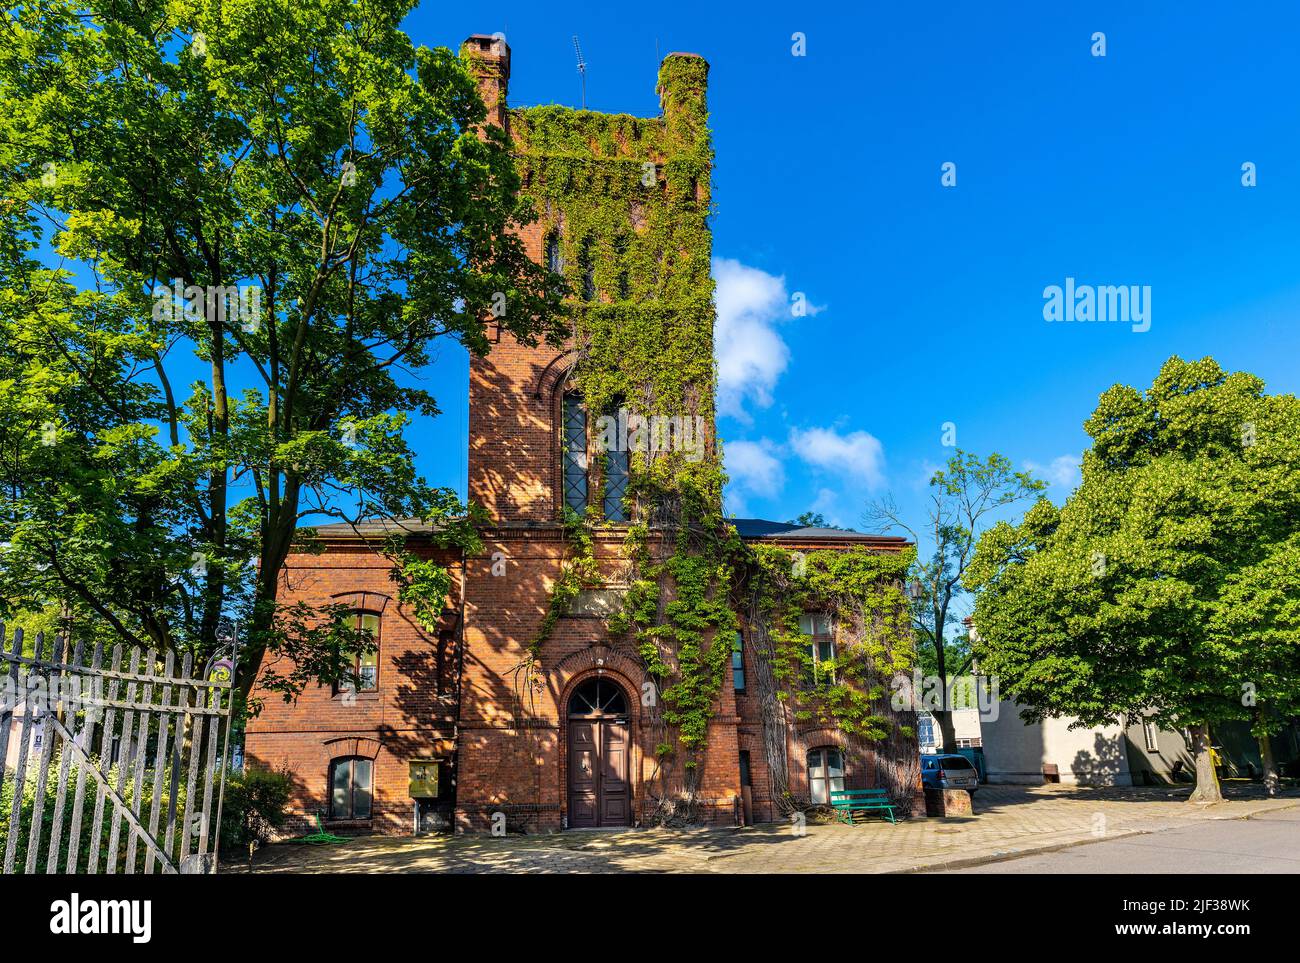 Skierniewice, Poland - June 14, 2022: XIX century brick stronghold with tower of Primate Palace - Palac Prymasowski - within Palace and Park complex Stock Photo